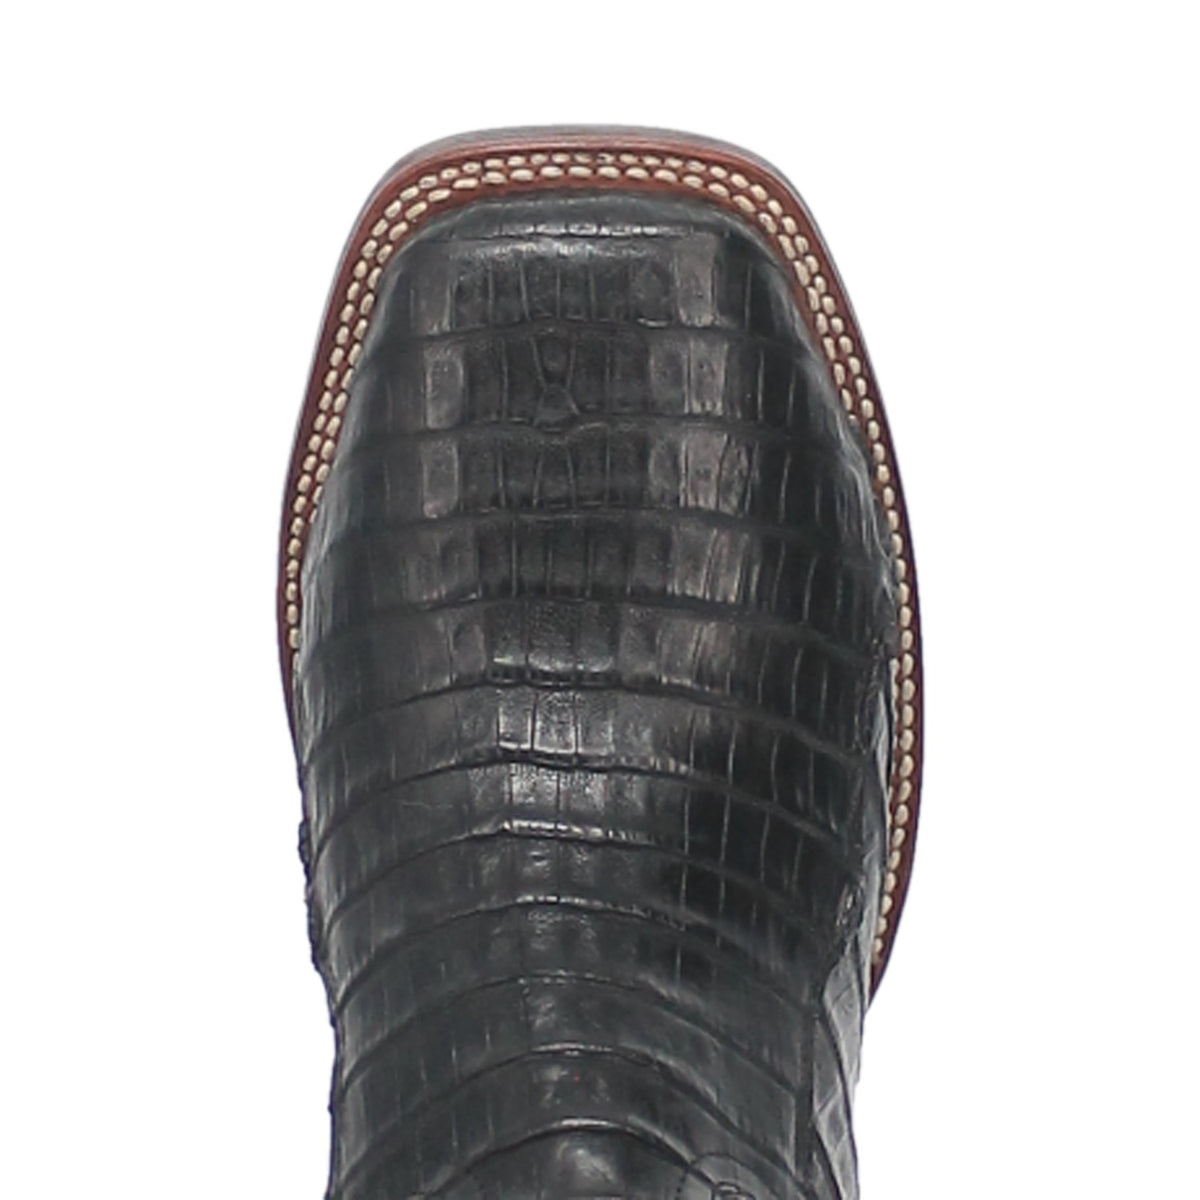 KINGSLY CAIMAN BOOT Cover